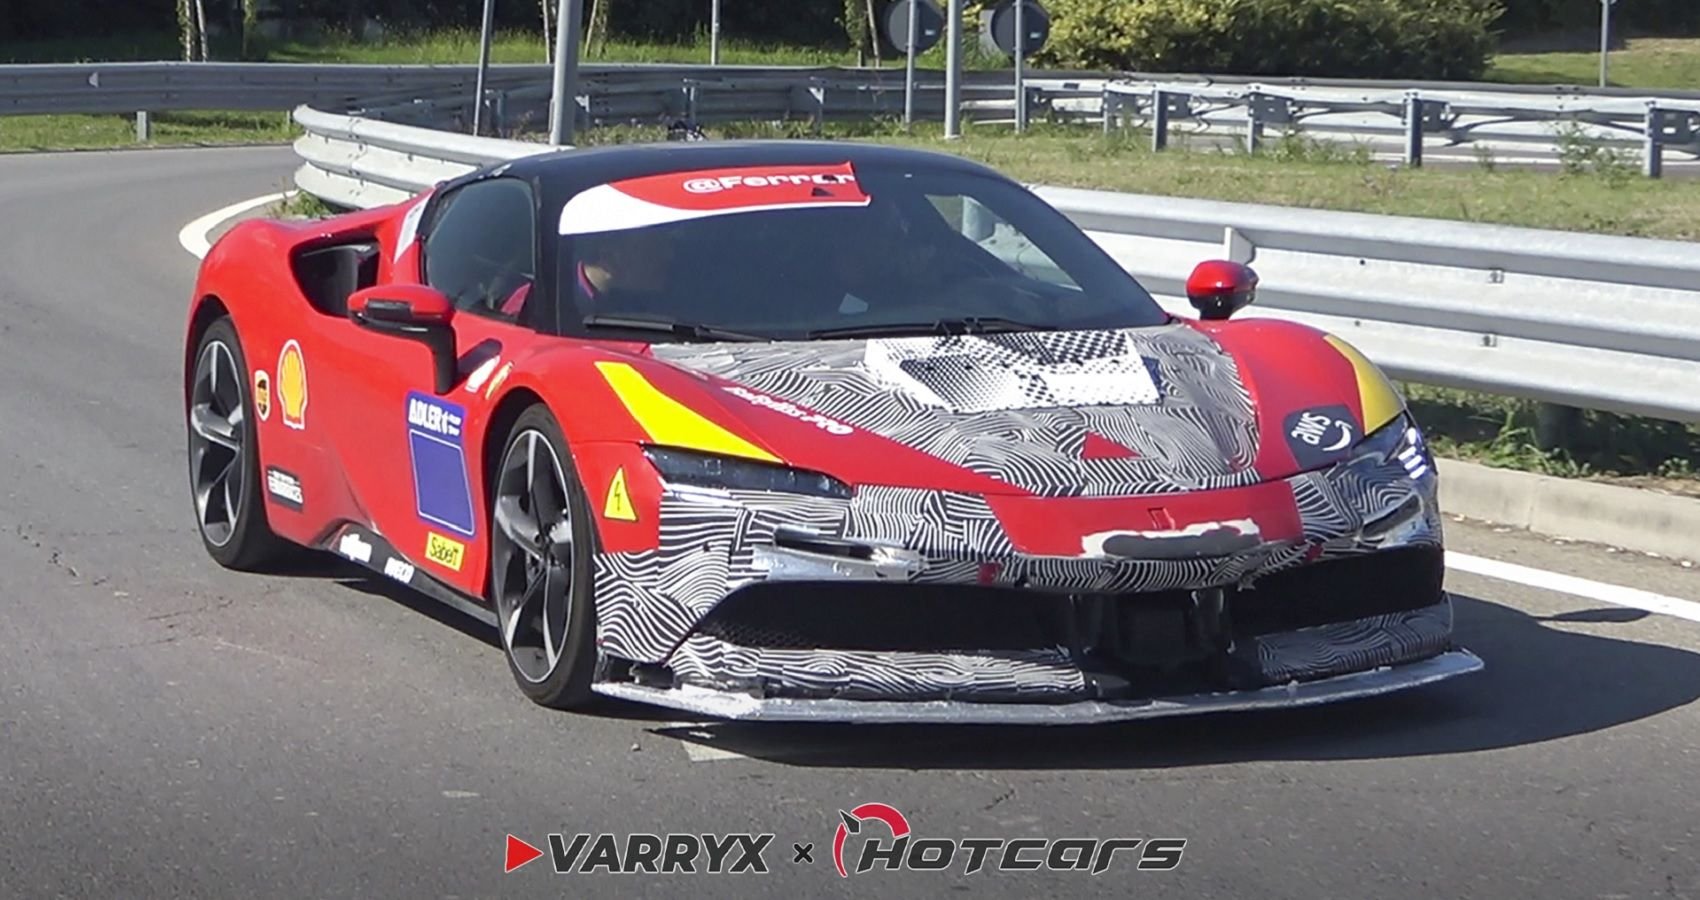 Check Out These Exclusive New Spy Photos Of The Ferrari SF90 VS